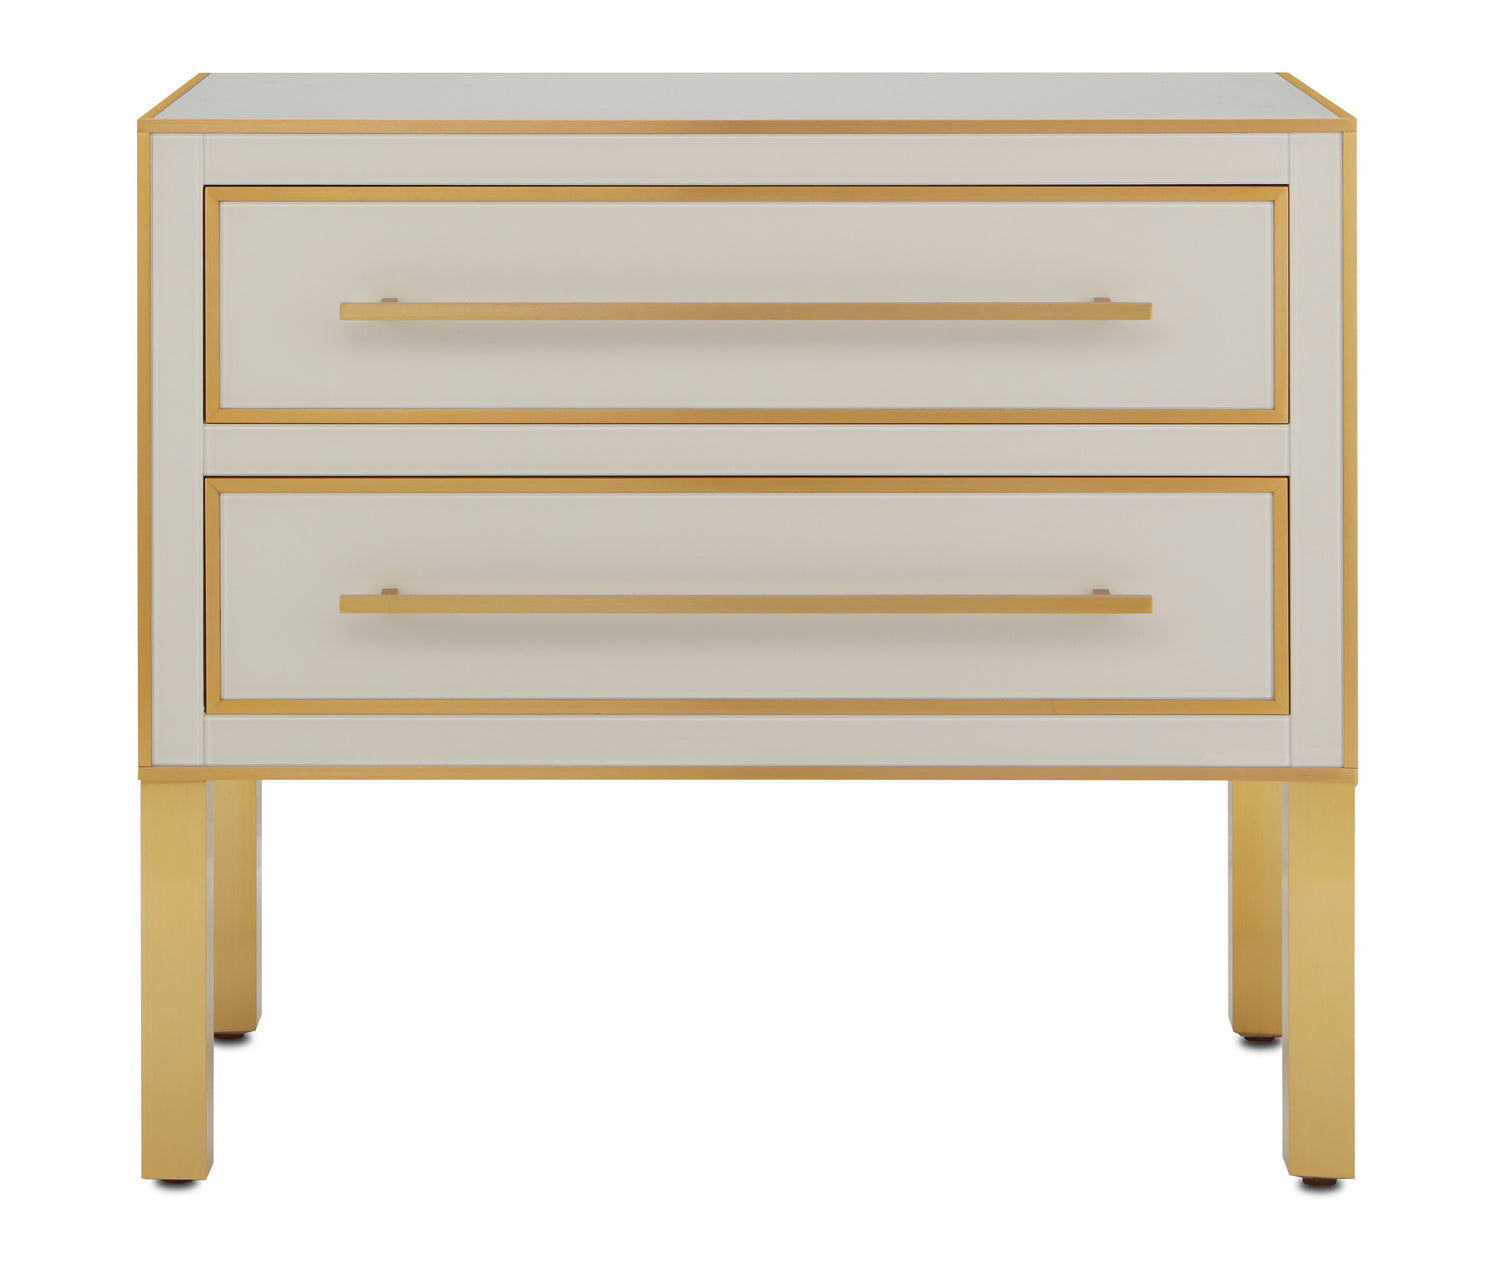 Chest from the Arden collection in Ivory/Satin Brass finish